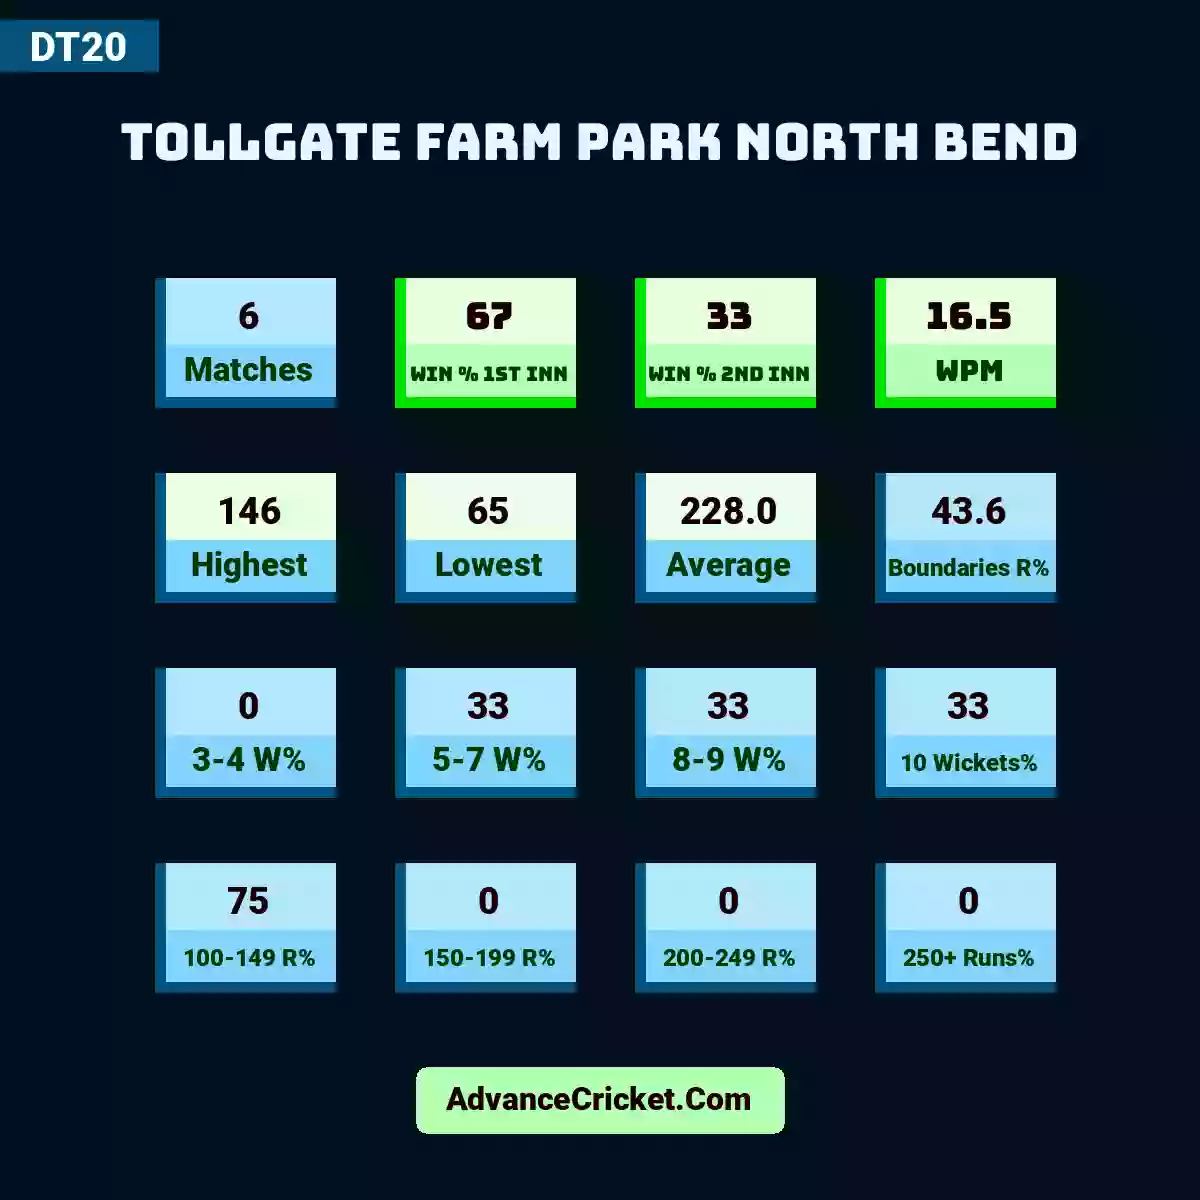 Image showing Tollgate Farm Park North Bend with Matches: 6, Win % 1st Inn: 67, Win % 2nd Inn: 33, WPM: 16.5, Highest: 146, Lowest: 65, Average: 228.0, Boundaries R%: 43.6, 3-4 W%: 0, 5-7 W%: 33, 8-9 W%: 33, 10 Wickets%: 33, 100-149 R%: 75, 150-199 R%: 0, 200-249 R%: 0, 250+ Runs%: 0.